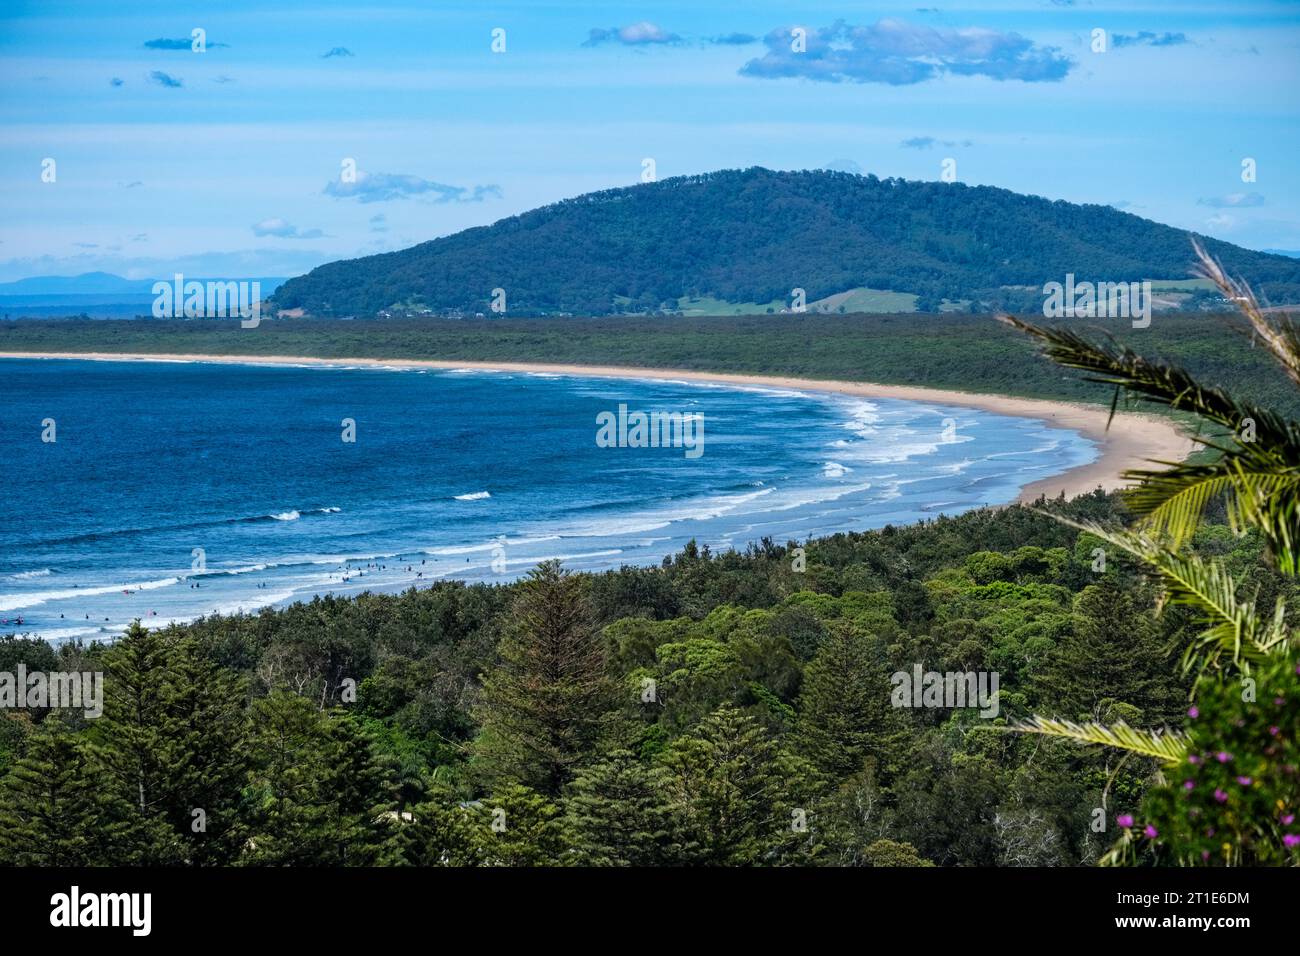 View of Seven Mile Beach from the Sir Charles Kingsford Smith Memorial Lookout, Gerroa, New South Wales, Australia Stock Photo